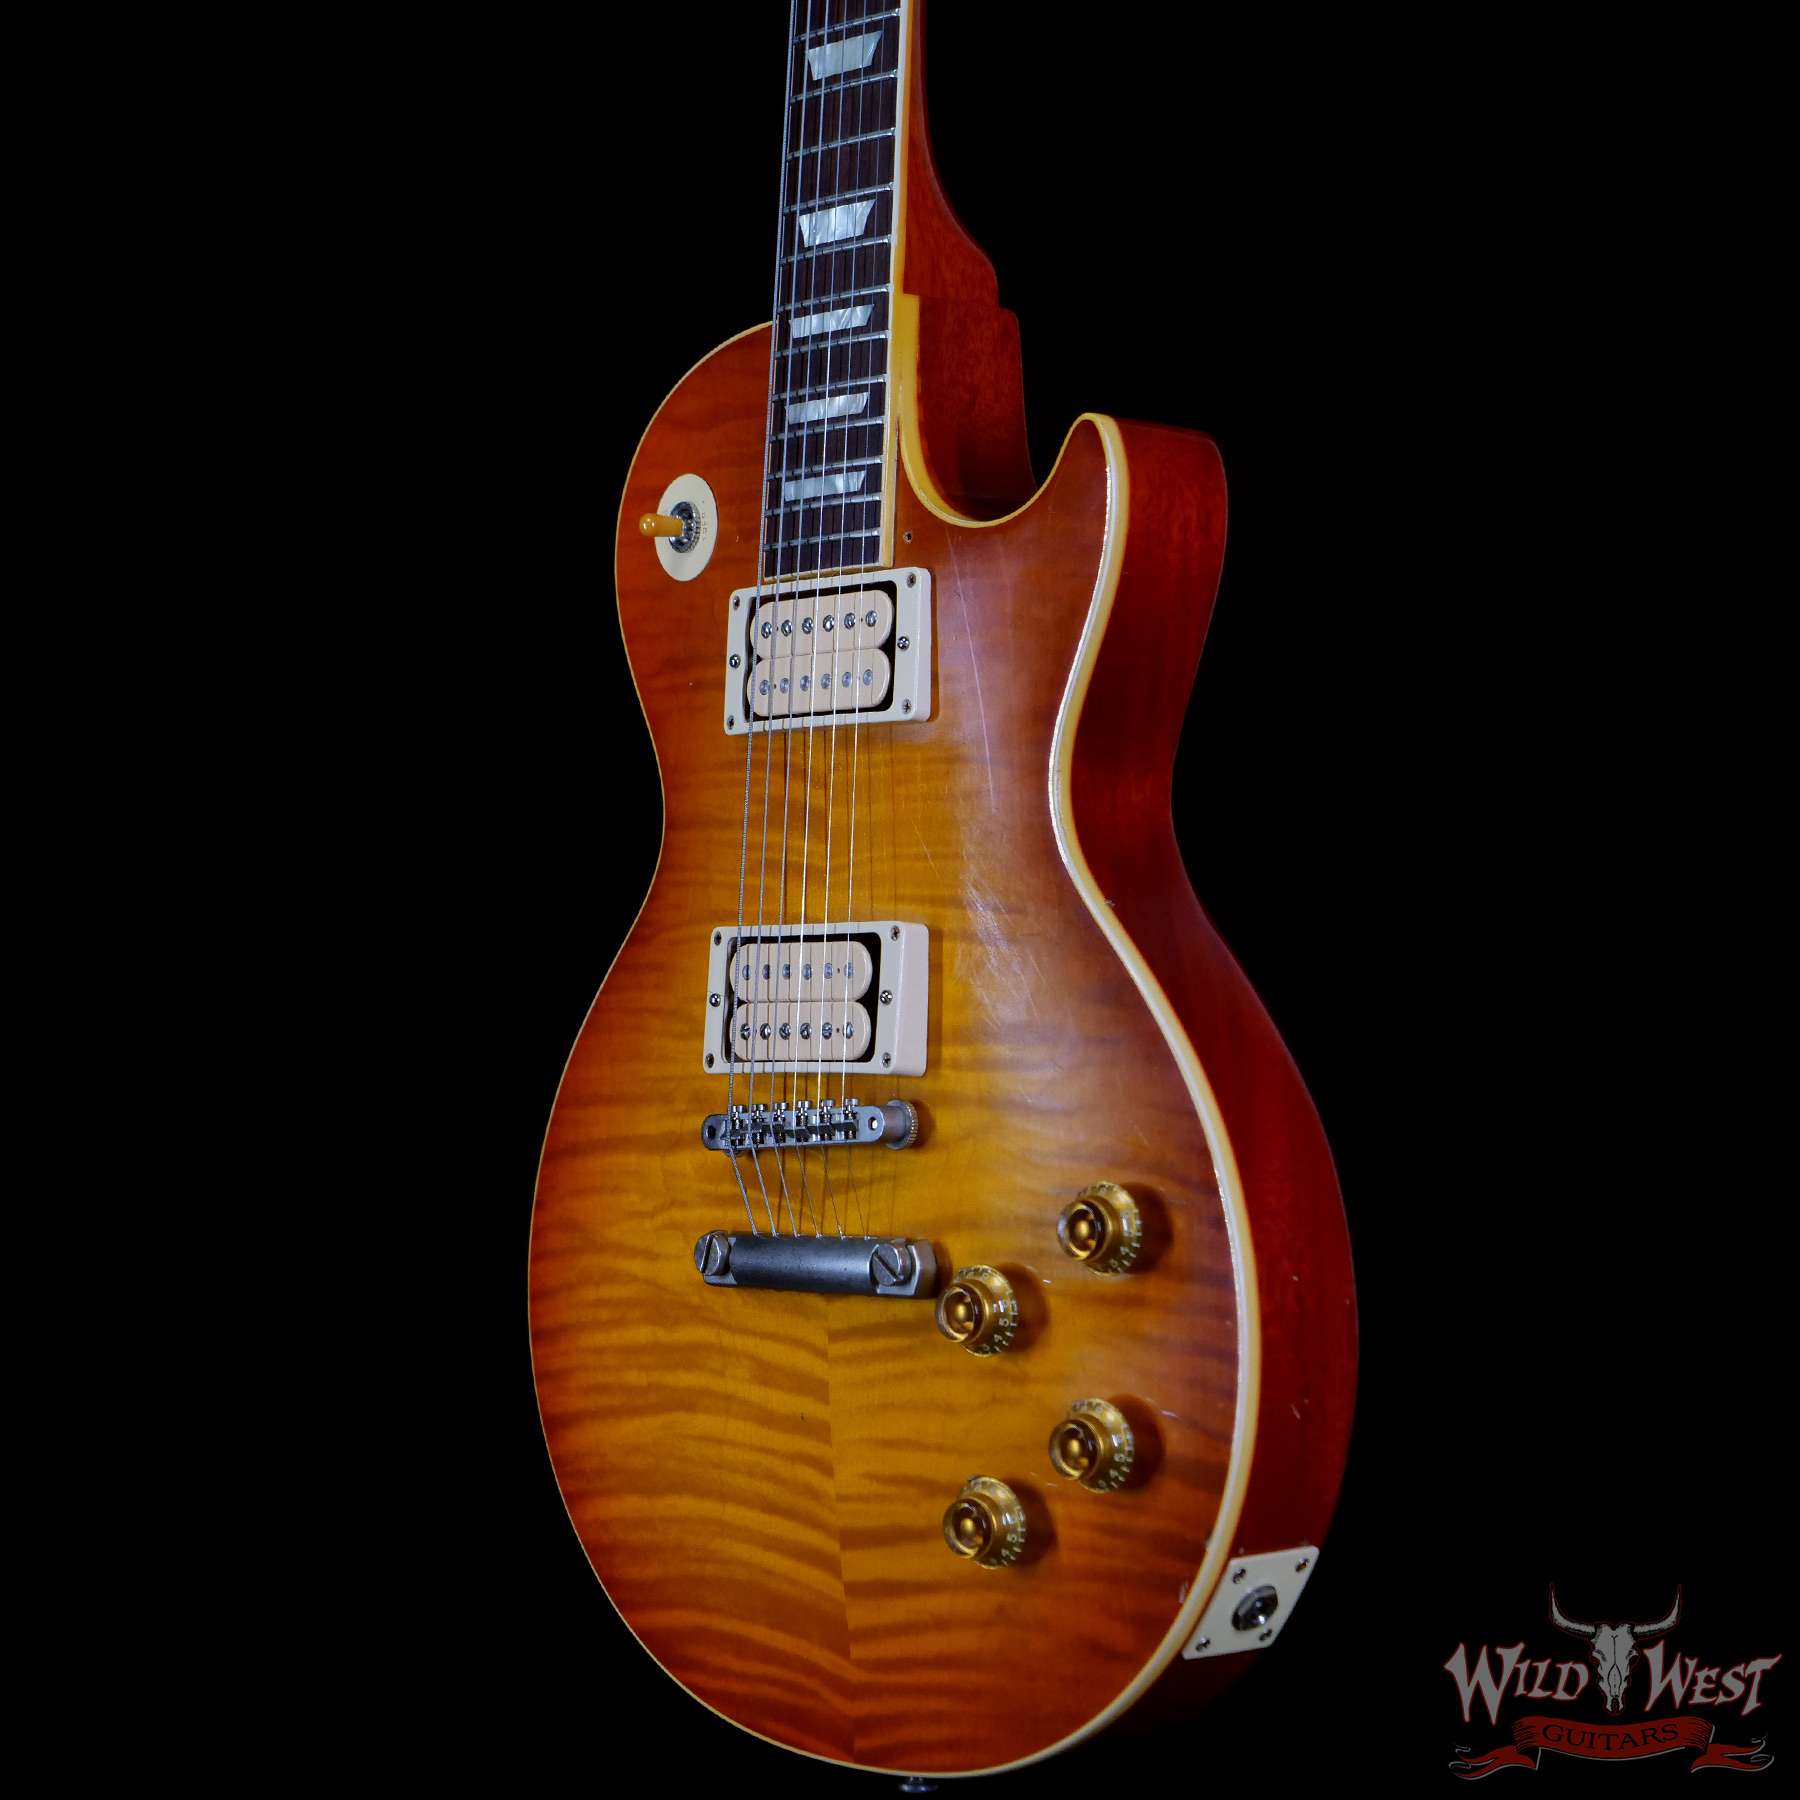 2017 Gibson Custom Shop Collector’s Choice # 38 1960 Les Paul Prototype # 1  Owned by Drew Berlin